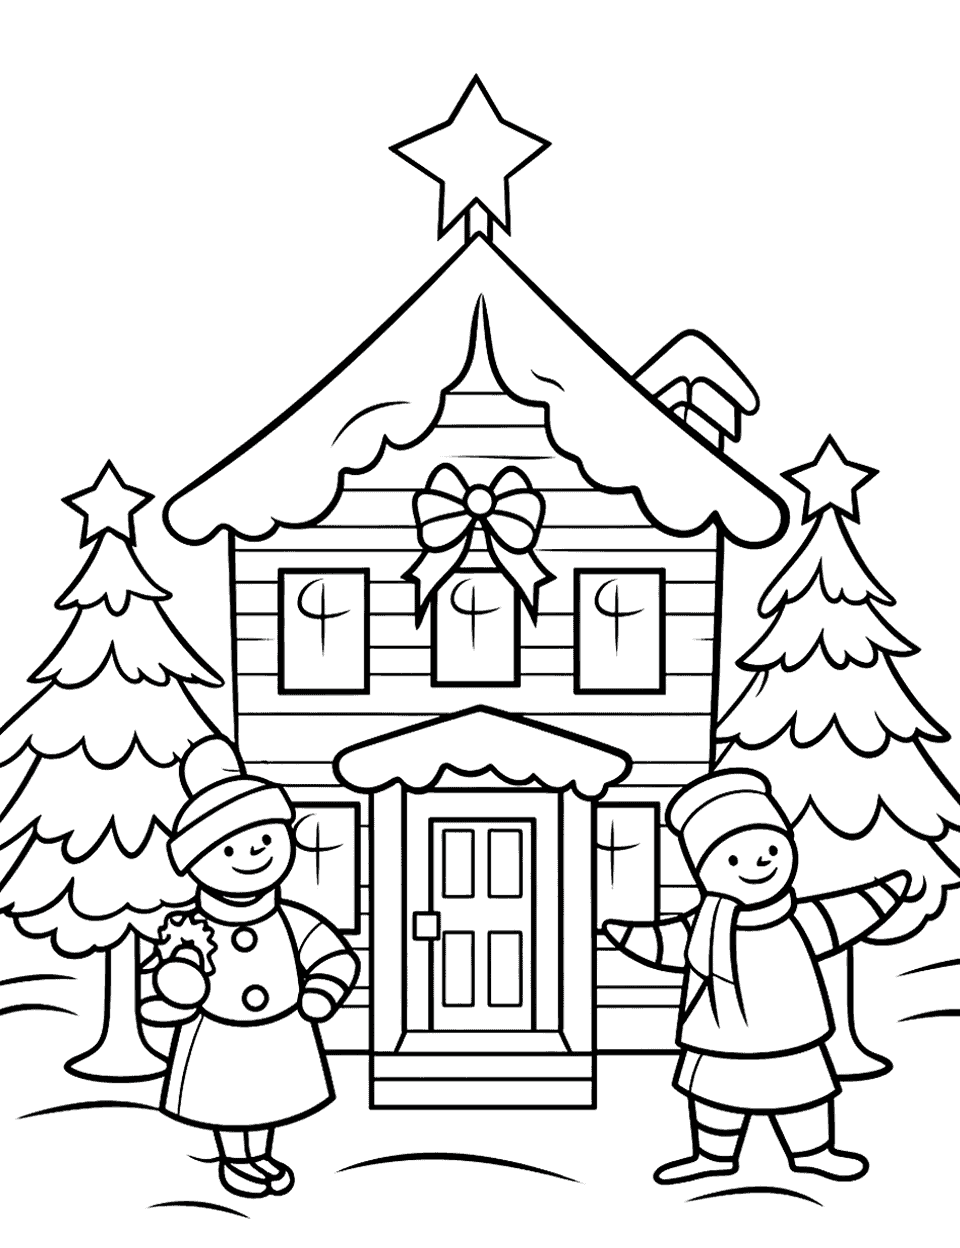 Large Christmas Scene Coloring Page - A large coloring page covering a full Christmas scene including a decorated home, snow-covered trees, and kids playing.